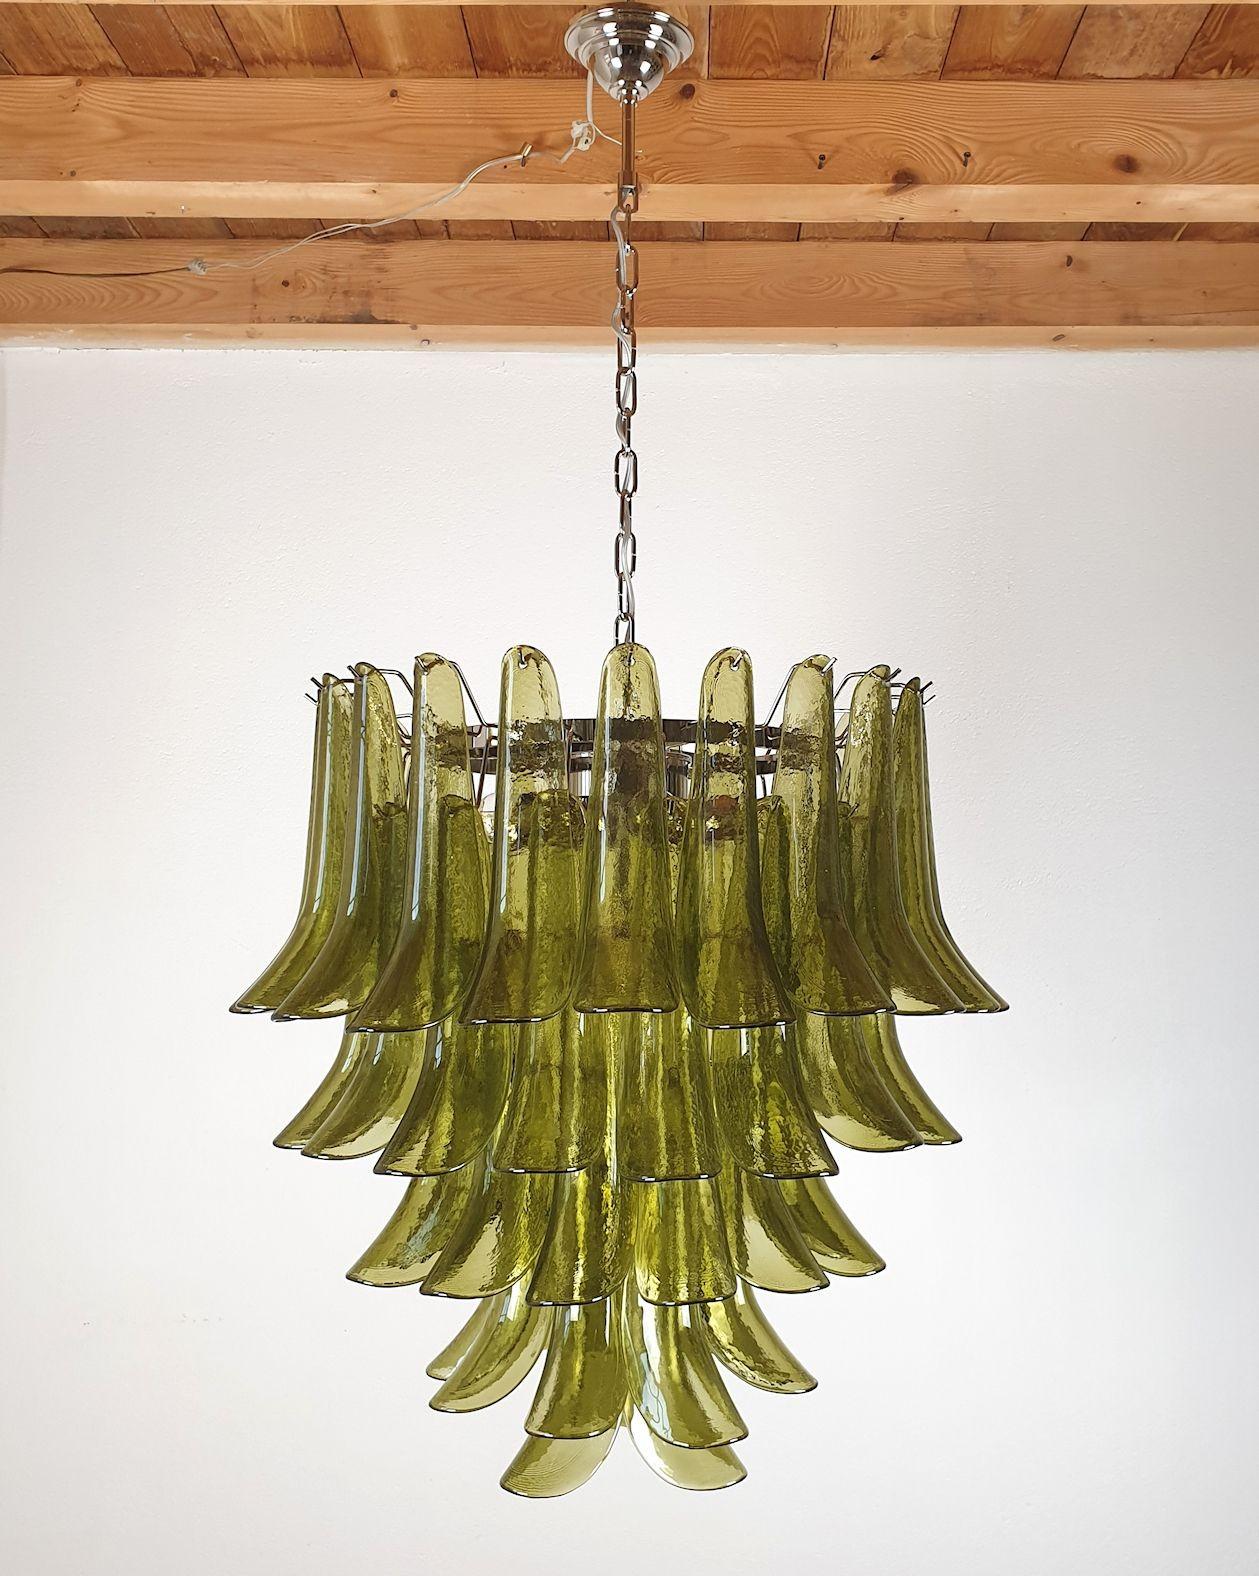 Mid-Century Modern five-tier green Murano glass chandelier, by Mazzega, Italy, late 1970s.
The Vintage Murano chandelier is made of delicate handmade glass, and a chrome frame.
The chandelier has 7 lights, rewired for the US.
It creates a warm glow